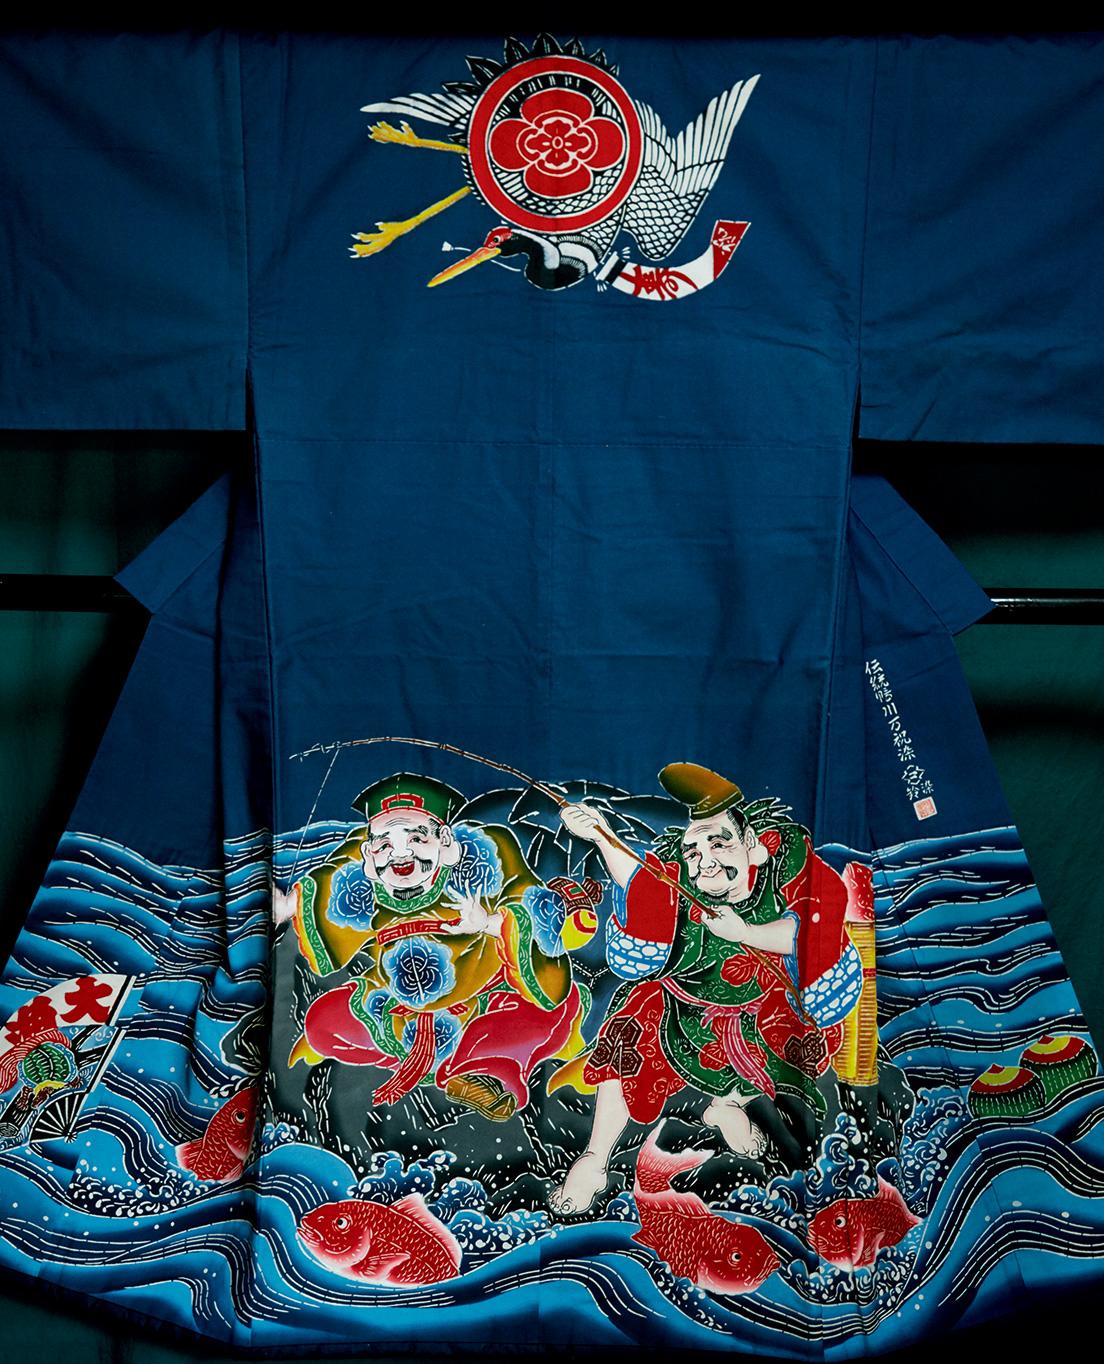 Purchase No. 30【Maiwai Jacket】A festive robe heralding good fortune, born of a seaport town’s tradition